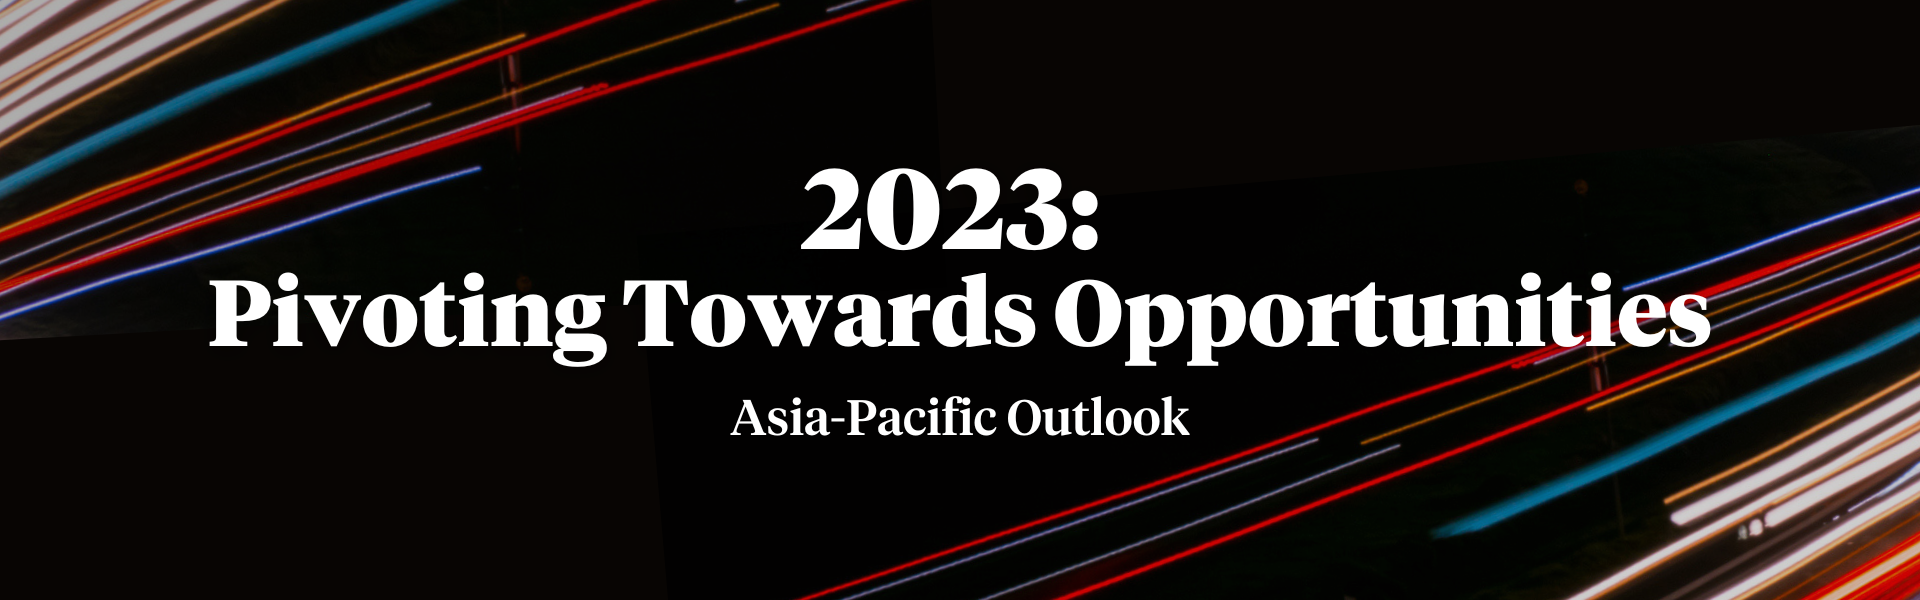 Outlook 2023 Landing page banner 1920x600